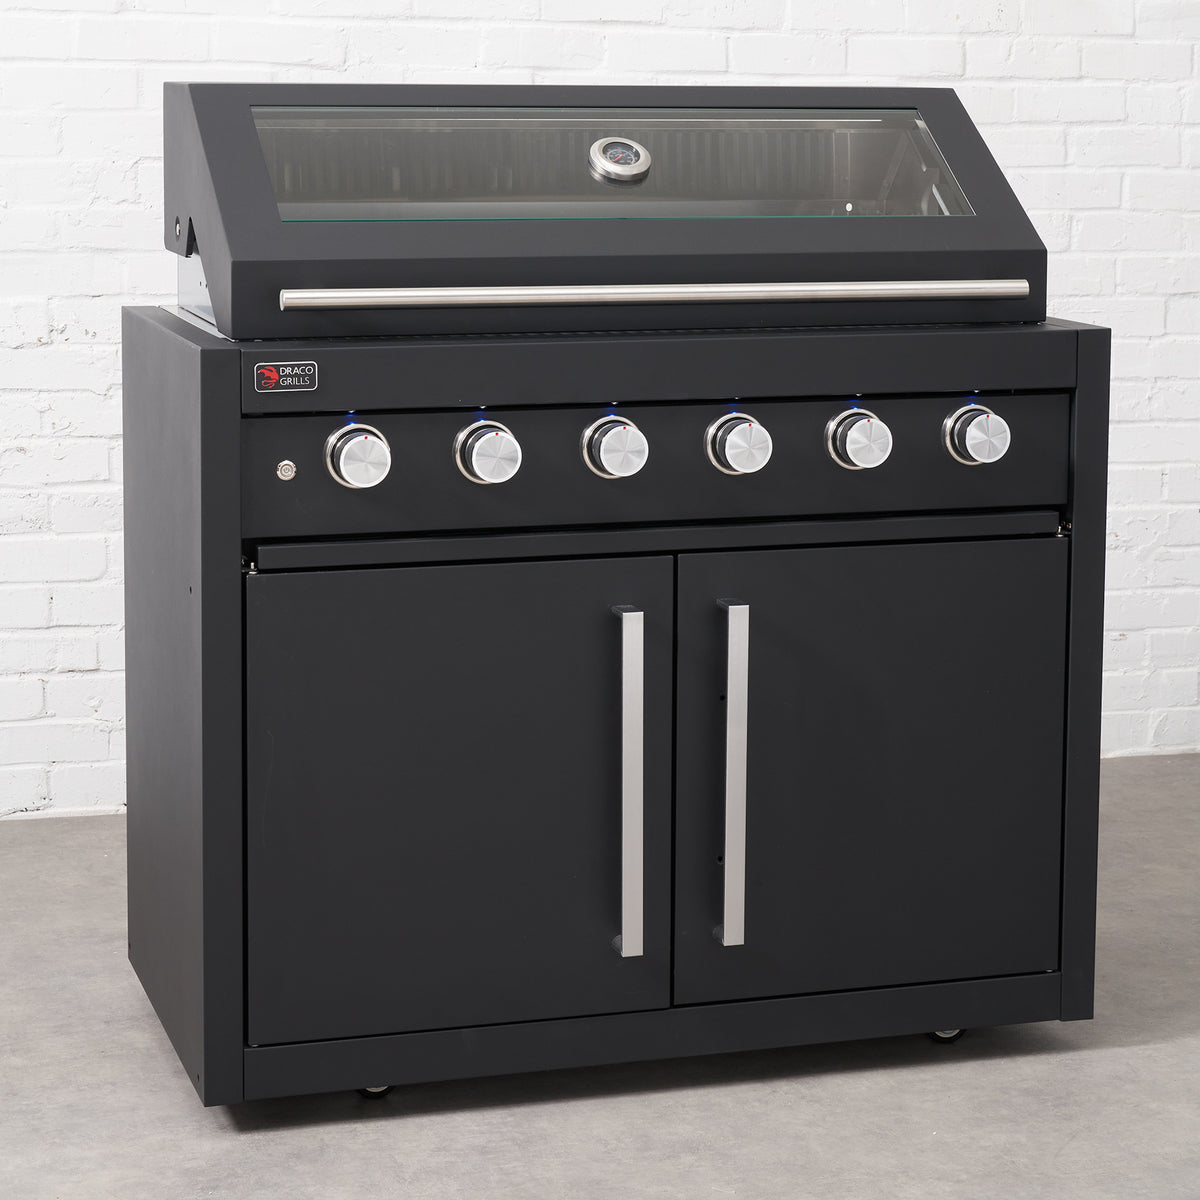 Draco Grills Fusion 6 Burner Black Outdoor Kitchen with Modular Side Burner and Double Cupboard